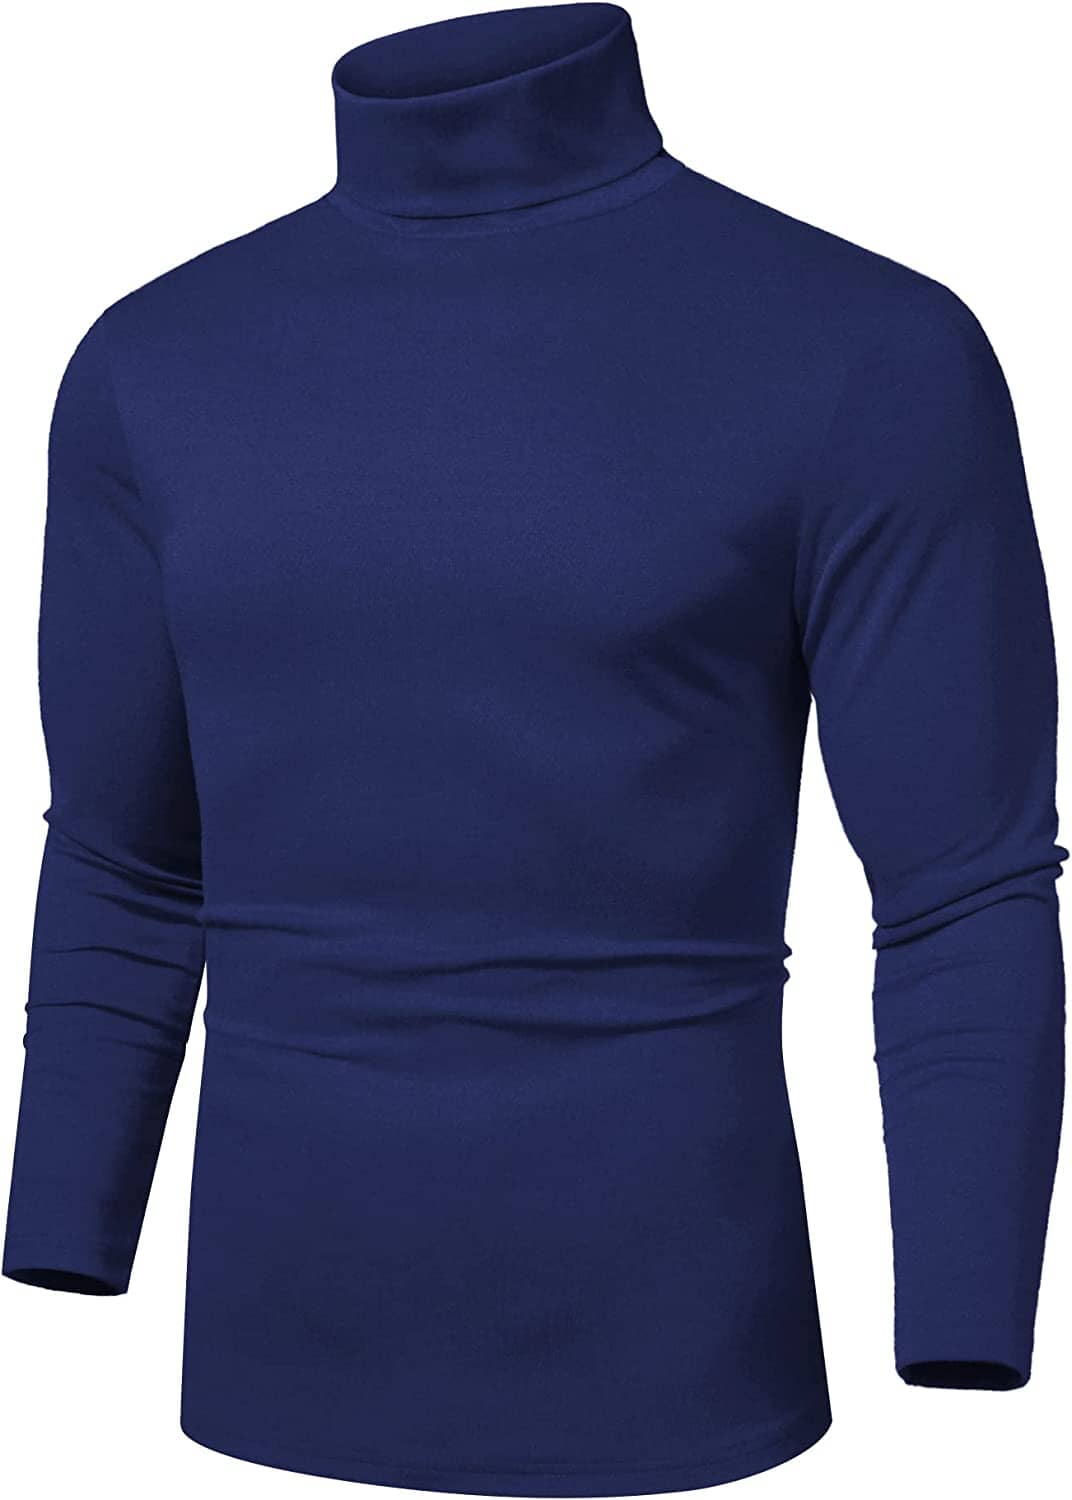 Slim Fit Basic Turtleneck Knitted Pullover Sweaters (US Only) Sweaters COOFANDY Store Dark Blue S 